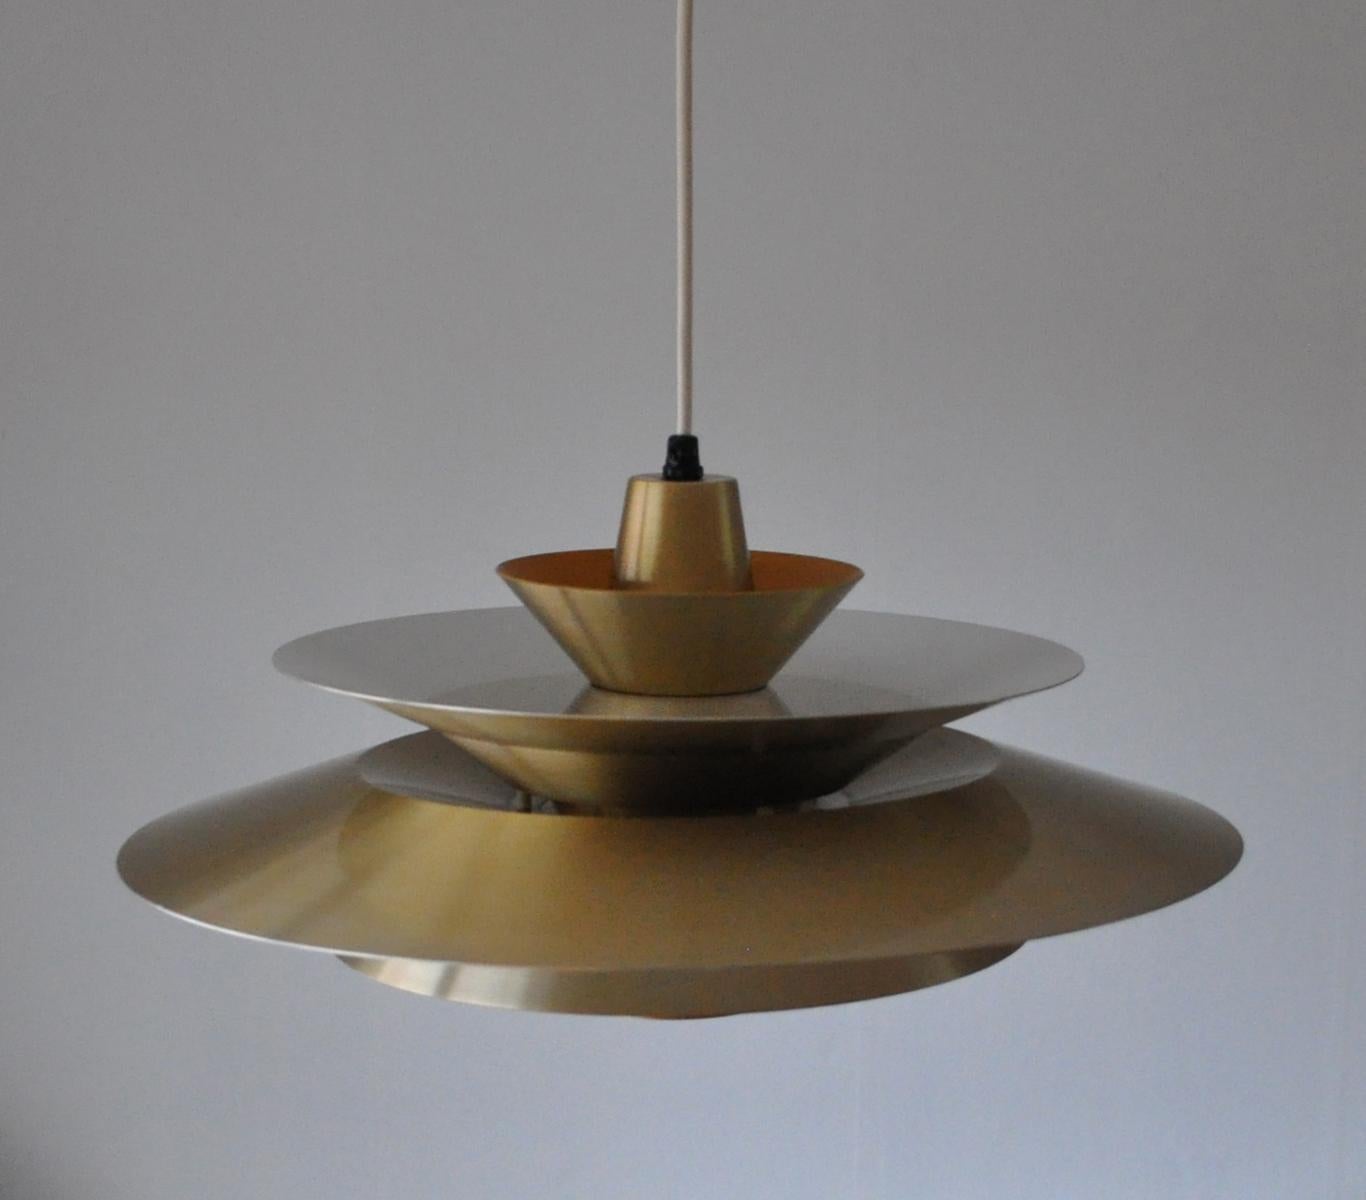 Multi-layered brass pendant lamp with orange and white inner shades which gives pleasant warm light when lit.
Designed by Lyskær Belysning in Denmark in the 1960s.

Very good vintage condition with small signs of wear consistent with age and